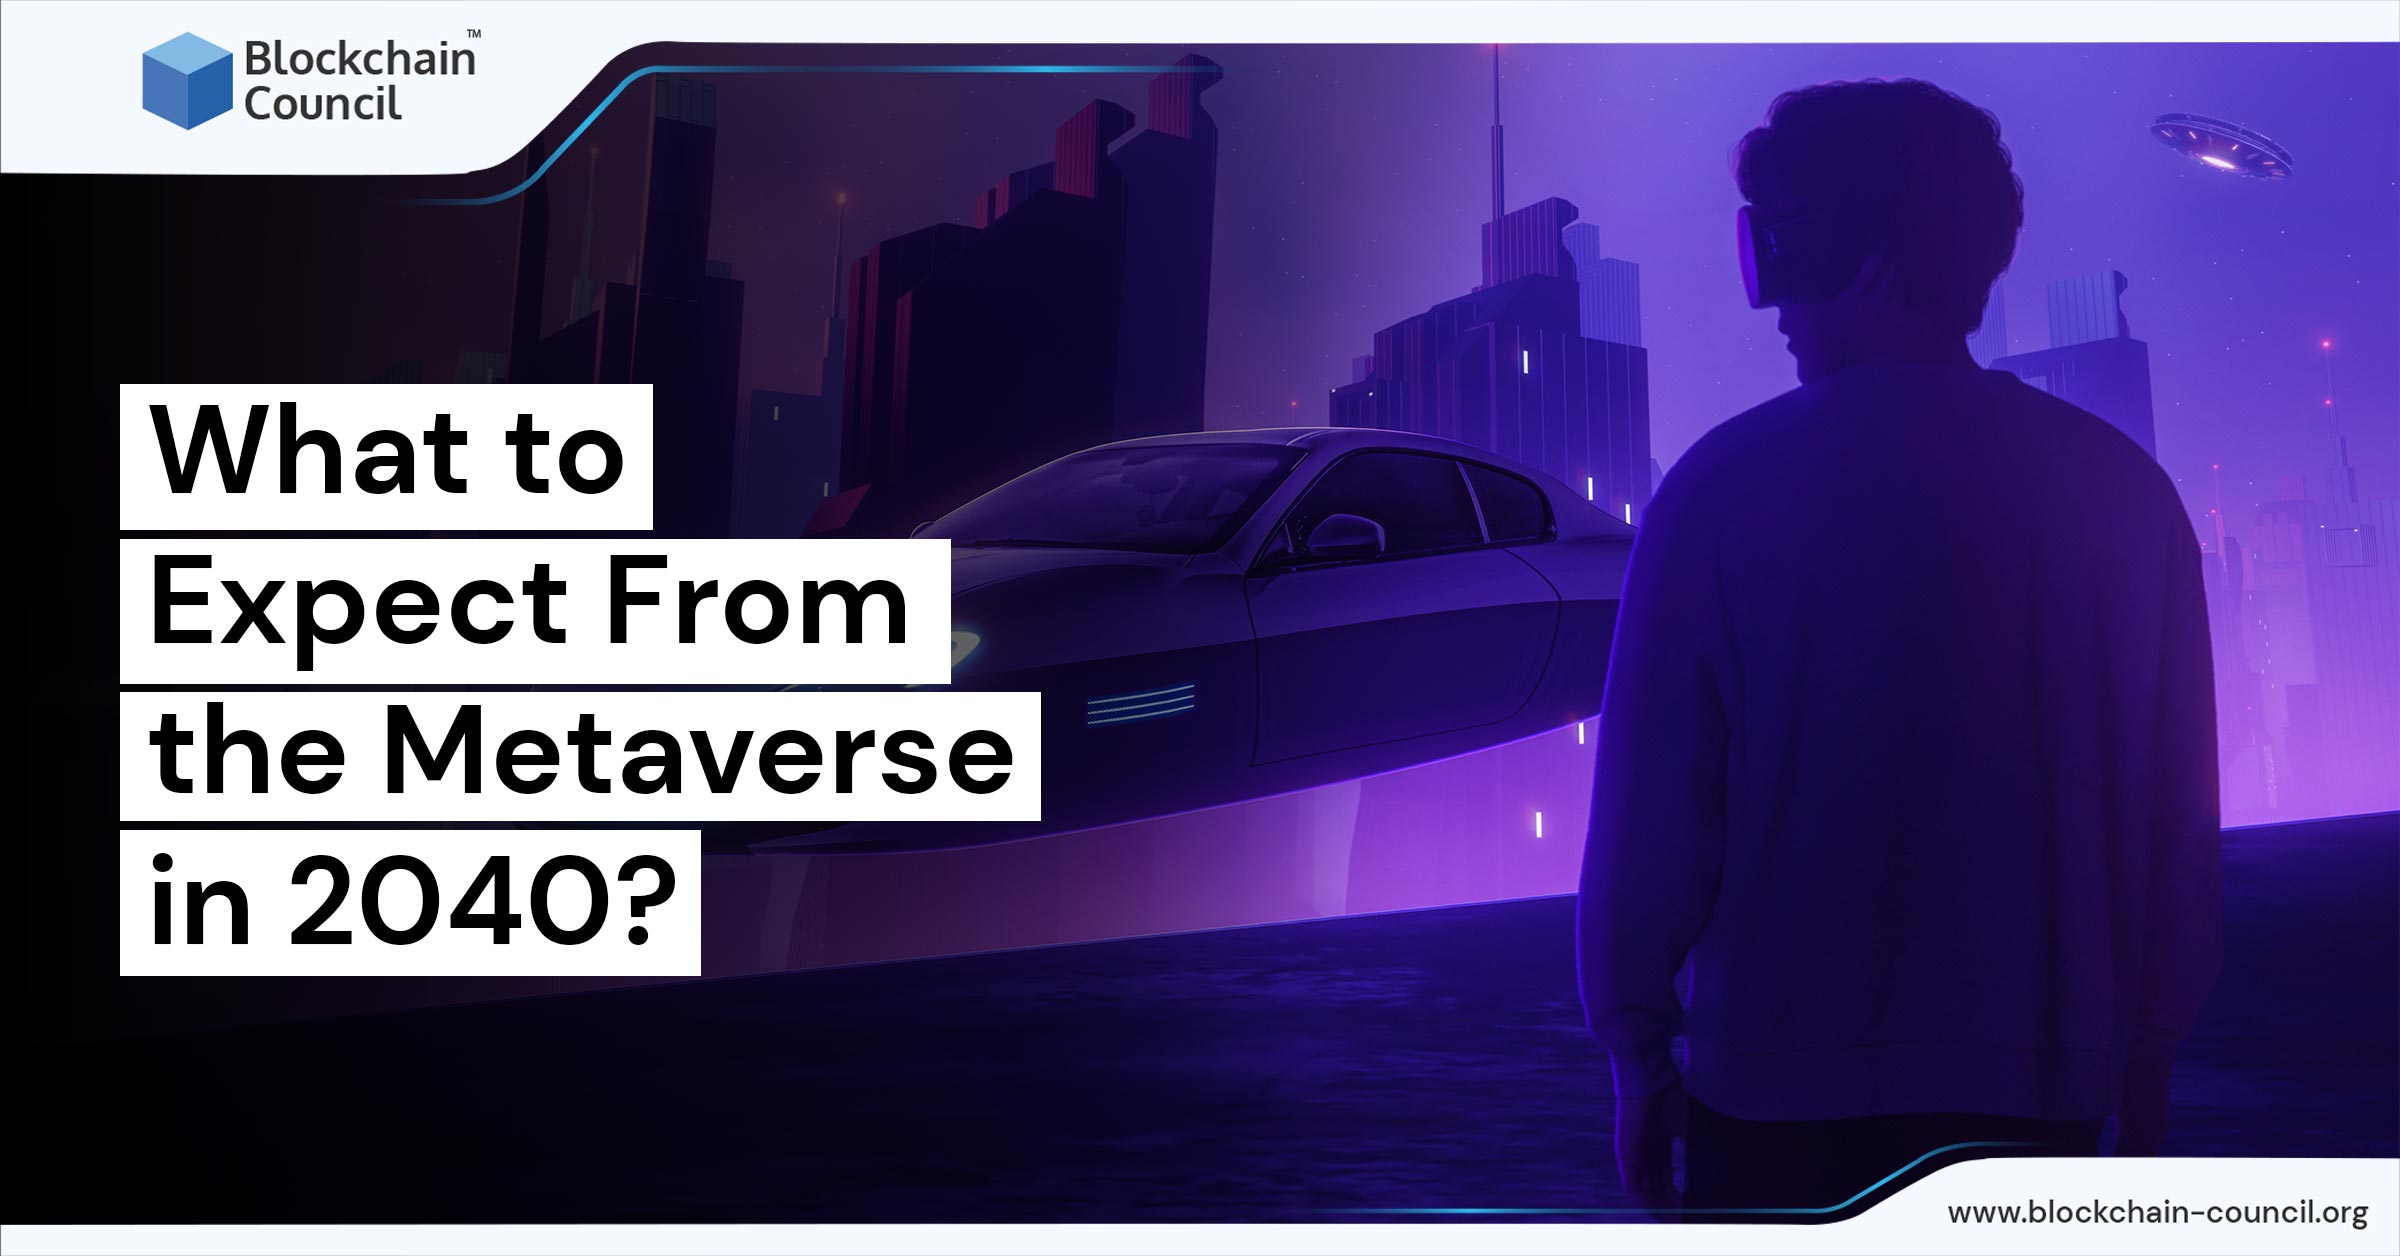 What to Expect From the Metaverse in 2040